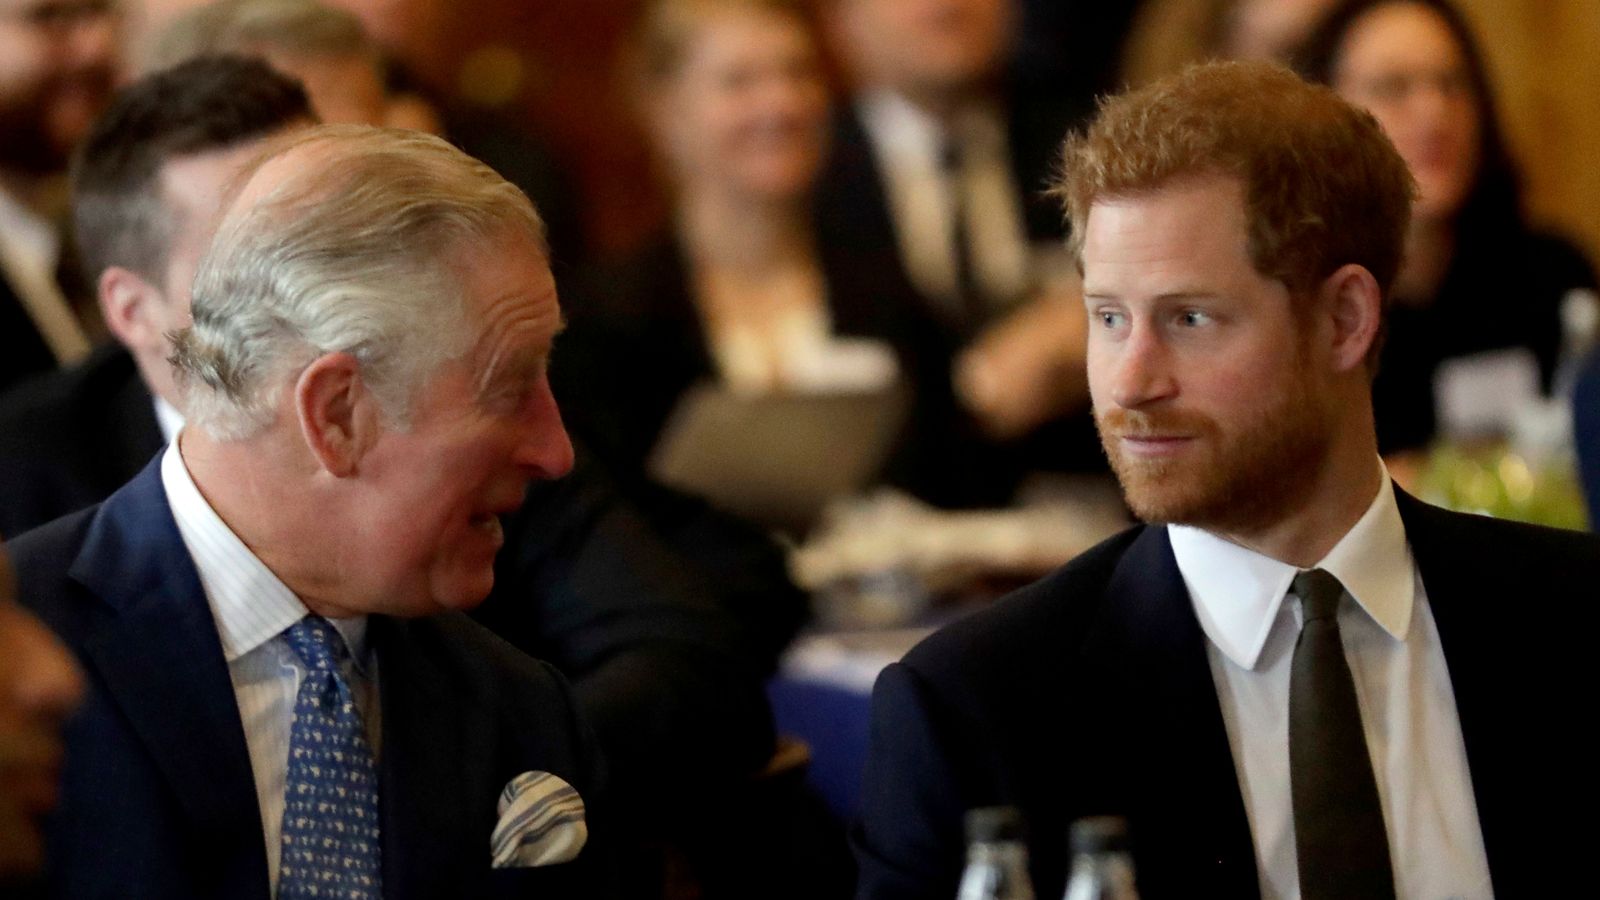 Prince Harry to travel to UK to see King 'in coming days' after cancer diagnosis